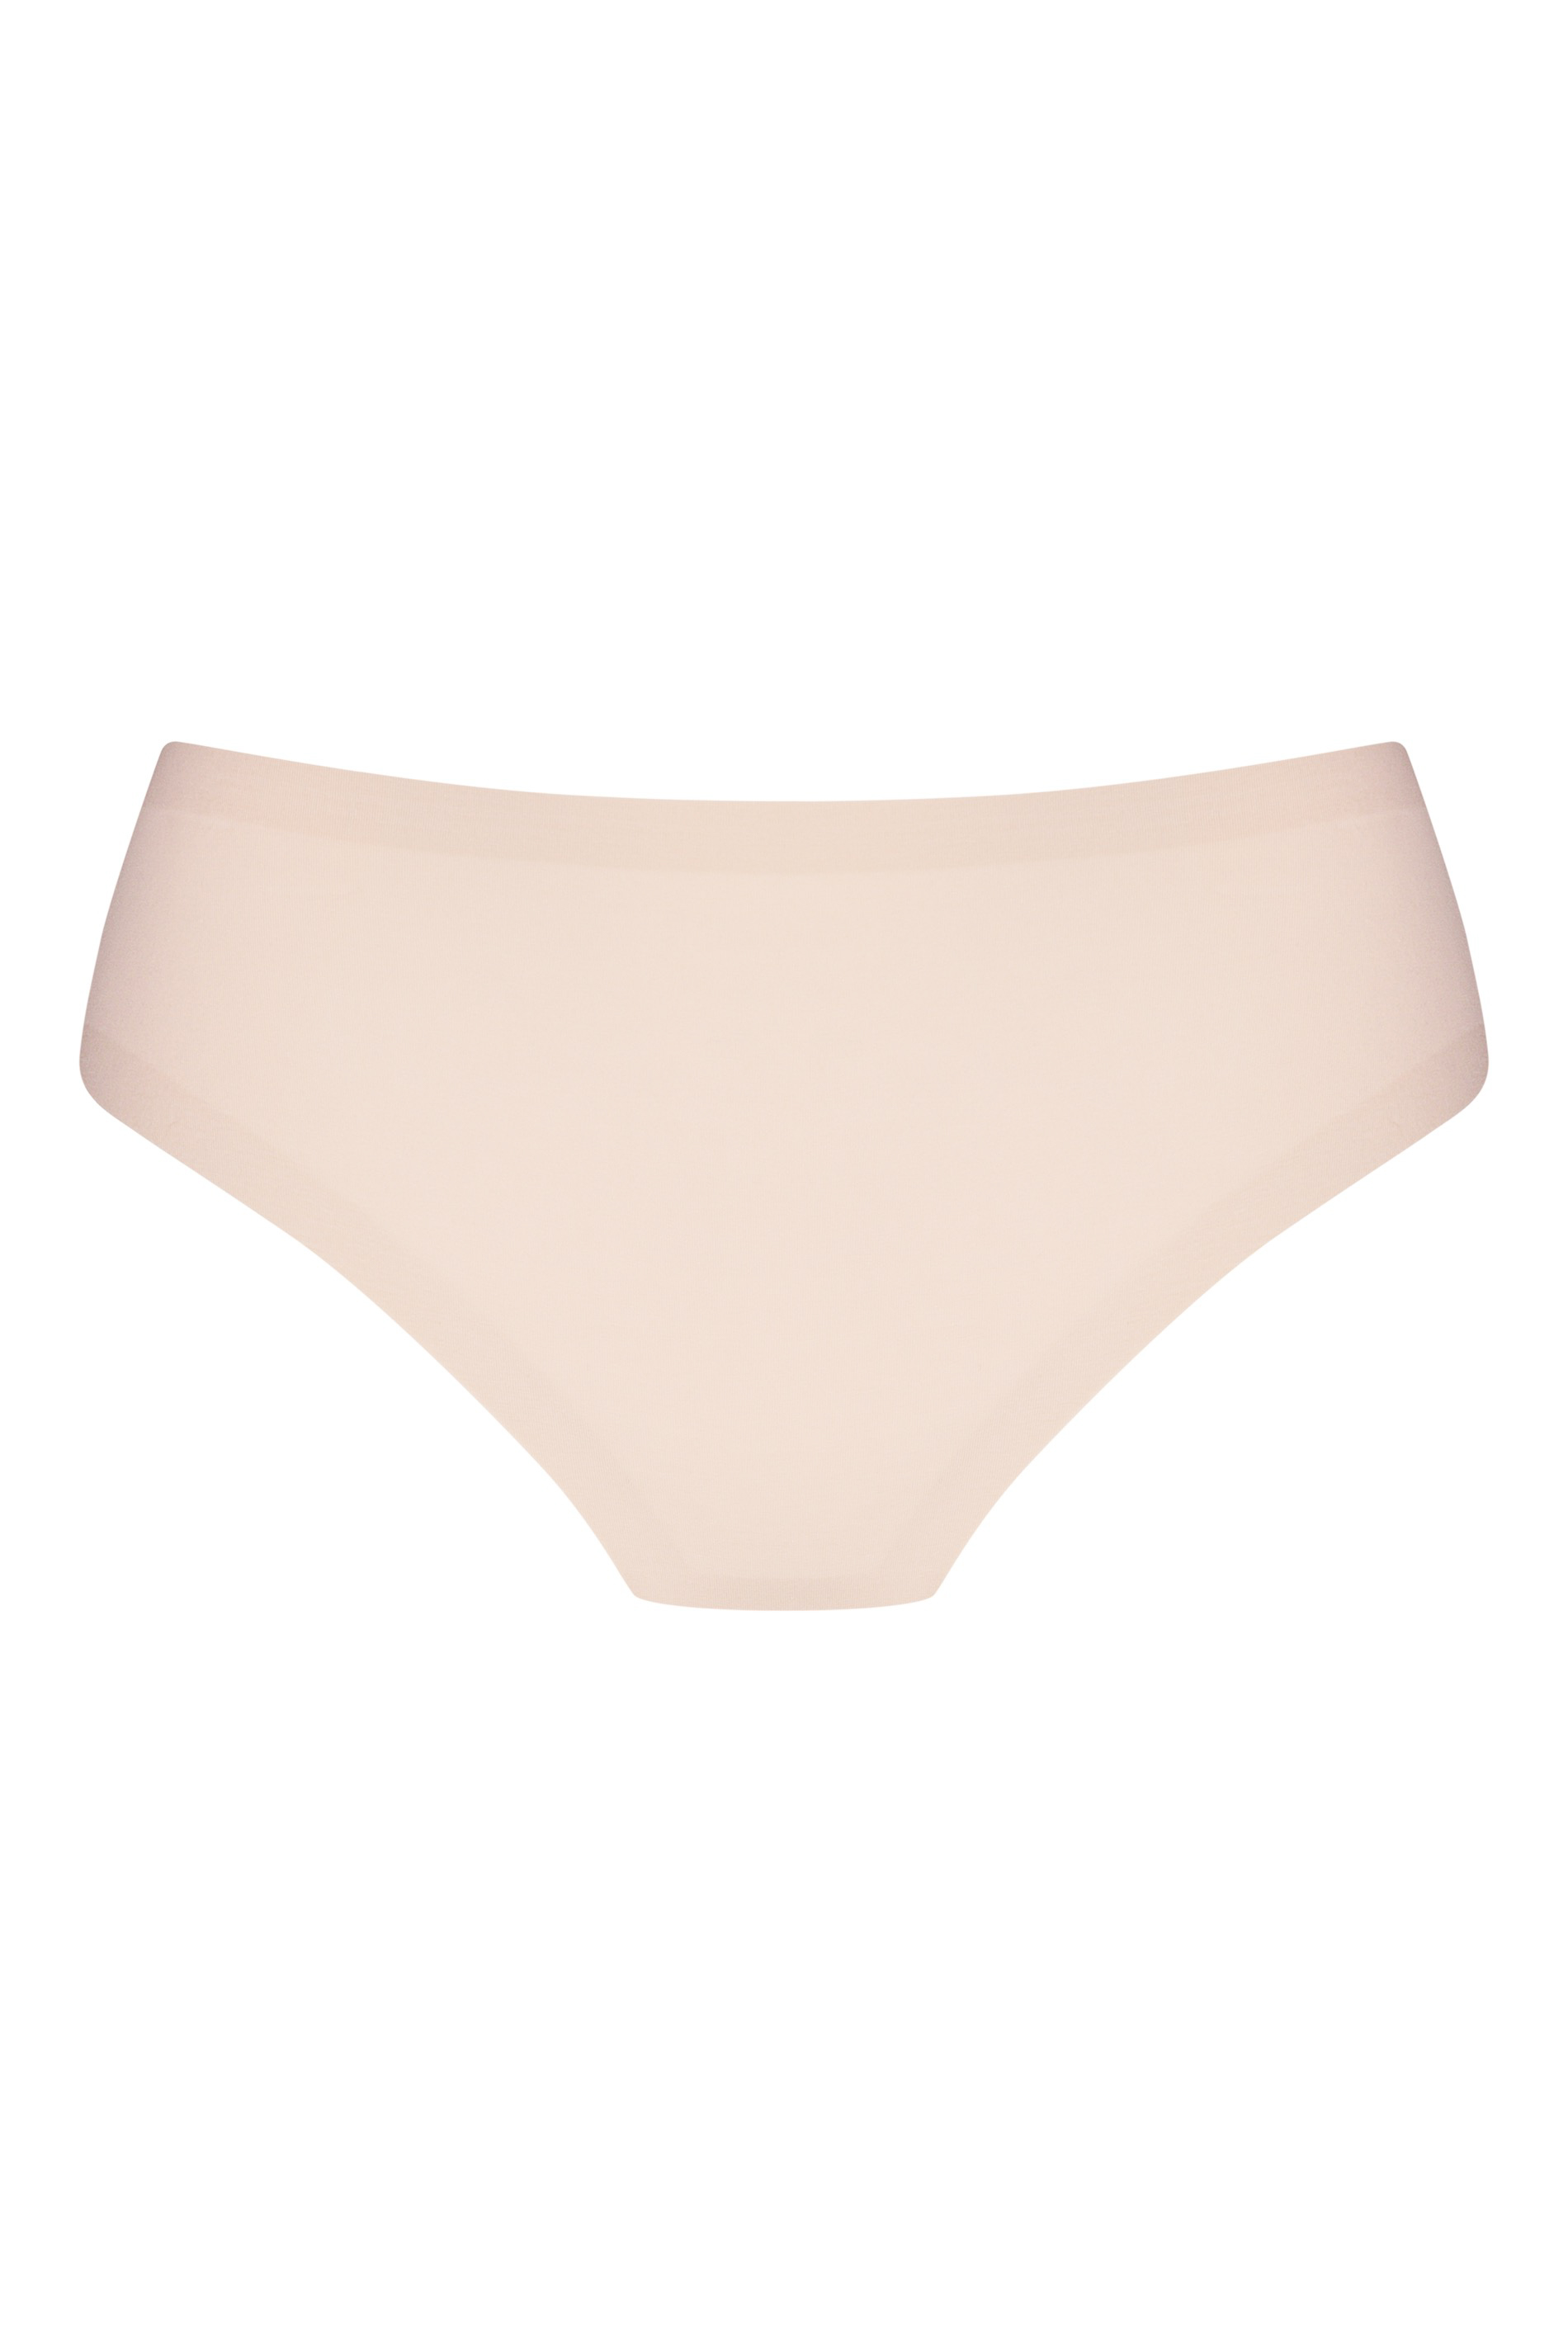 American-pants New Pearl Serie Natural Second me Uitknippen | mey®